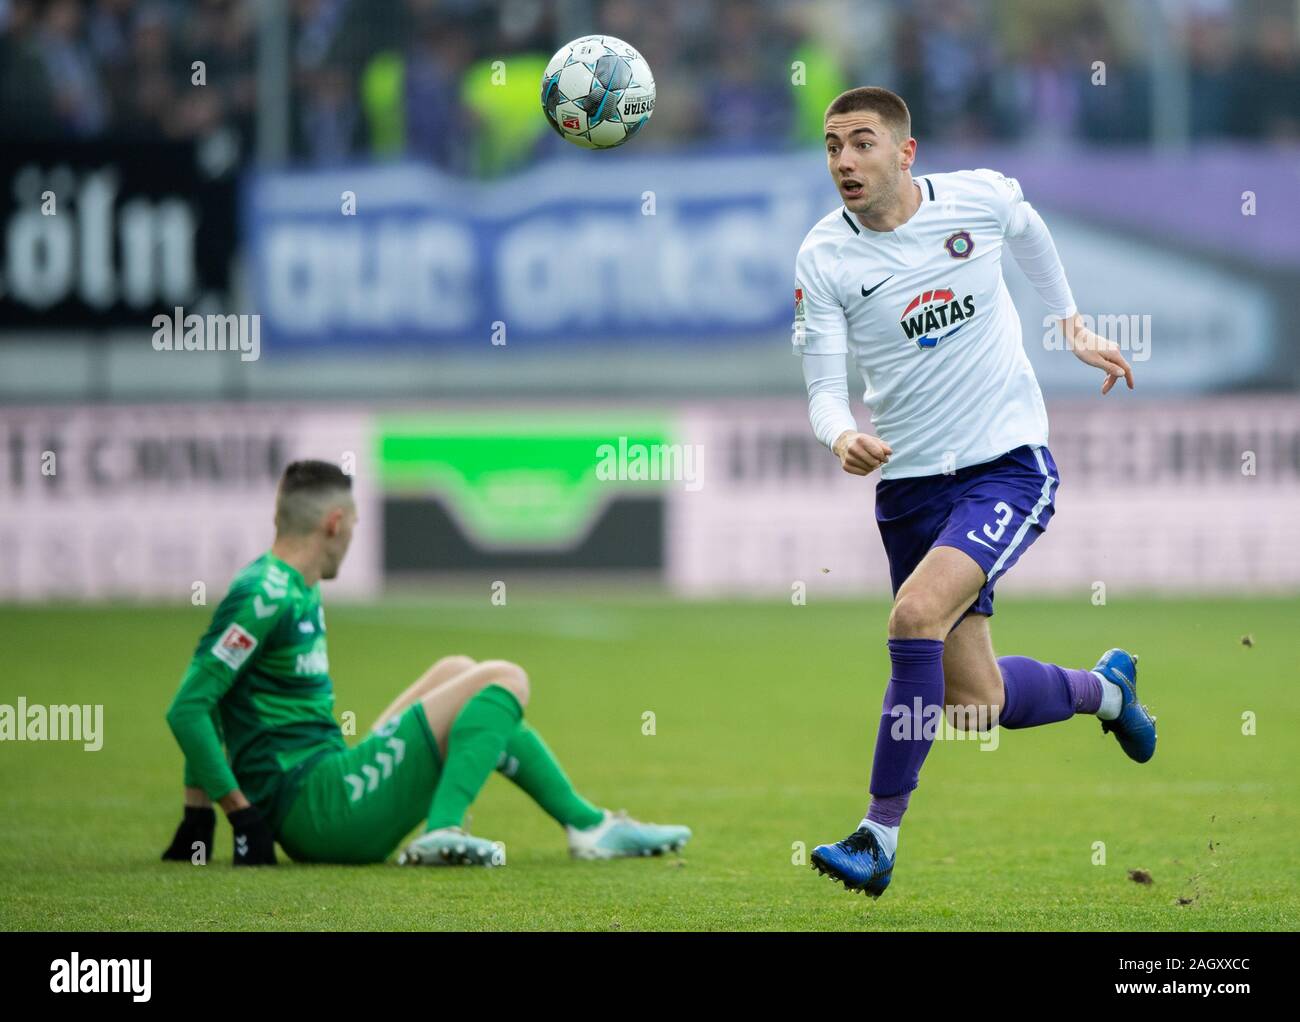 Aue, Germany. 21st Dec, 2019. Football: 2nd Bundesliga, FC Erzgebirge Aue - SpVgg Greuther Fürth, 18th matchday, at the Sparkassen-Erzgebirgsstadion. Aues Marko Mihojevic plays the ball. Credit: Robert Michael/dpa-Zentralbild/dpa - IMPORTANT NOTE: In accordance with the regulations of the DFL Deutsche Fußball Liga and the DFB Deutscher Fußball-Bund, it is prohibited to exploit or have exploited in the stadium and/or from the game taken photographs in the form of sequence images and/or video-like photo series./dpa/Alamy Live News Stock Photo